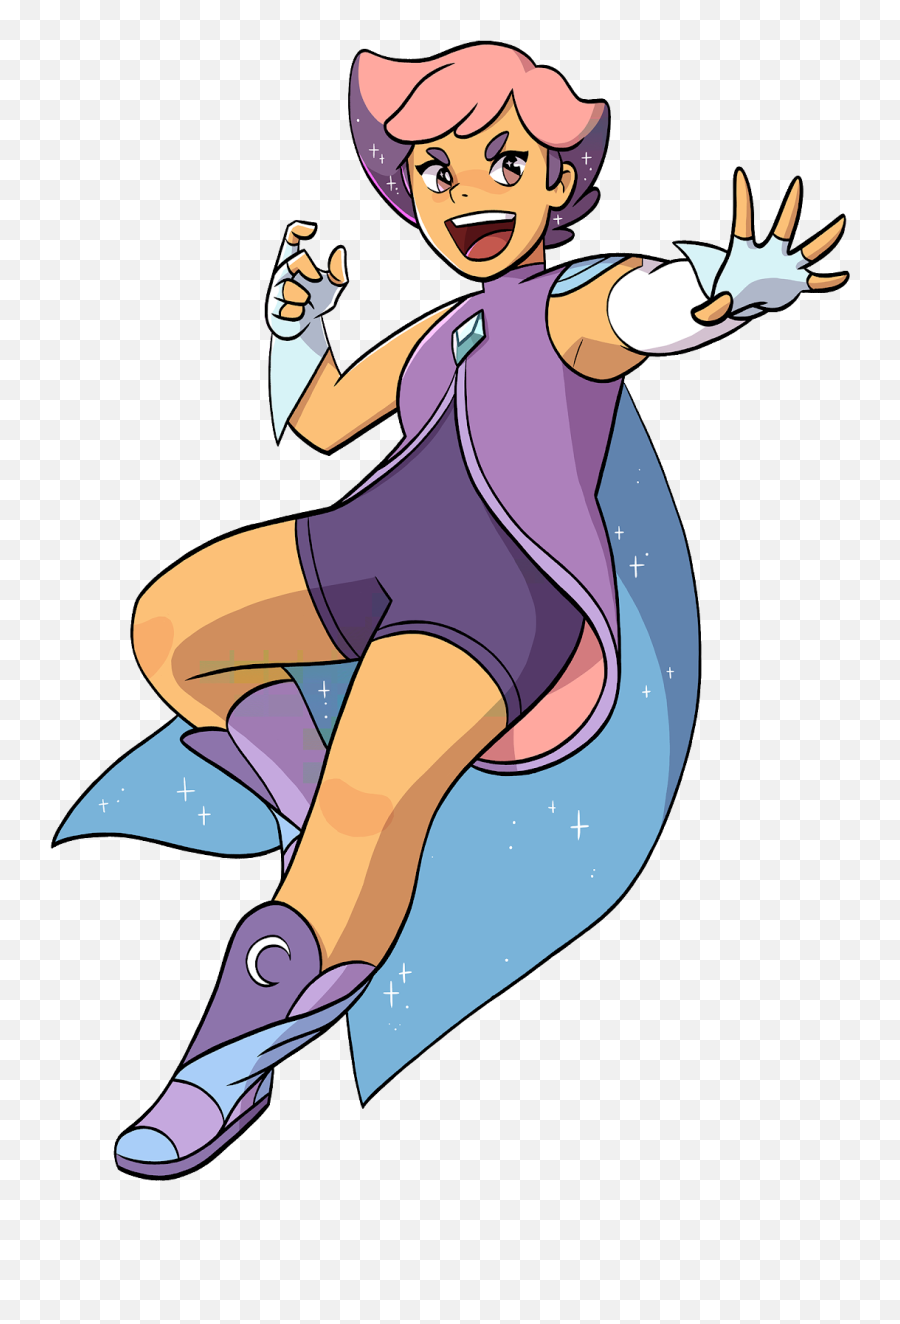 Glimmer She - Ra And The Princesses Of Power Wiki Fandom Emoji,She Said I Drove Her Away With My Emotions